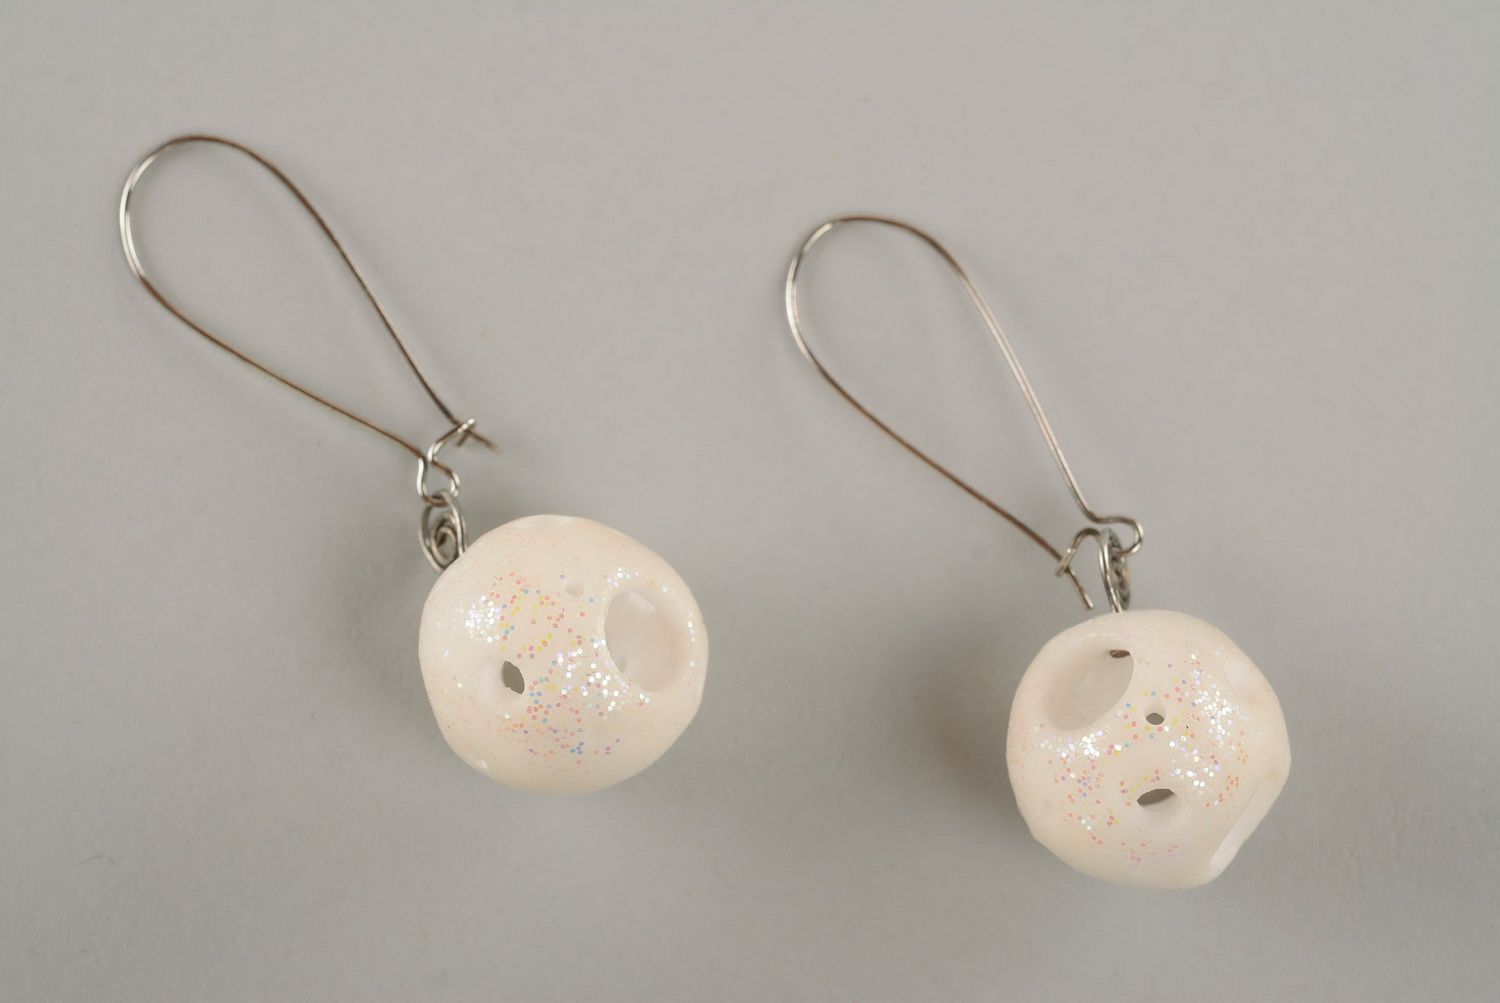 Luminous earrings made of polymer clay photo 3